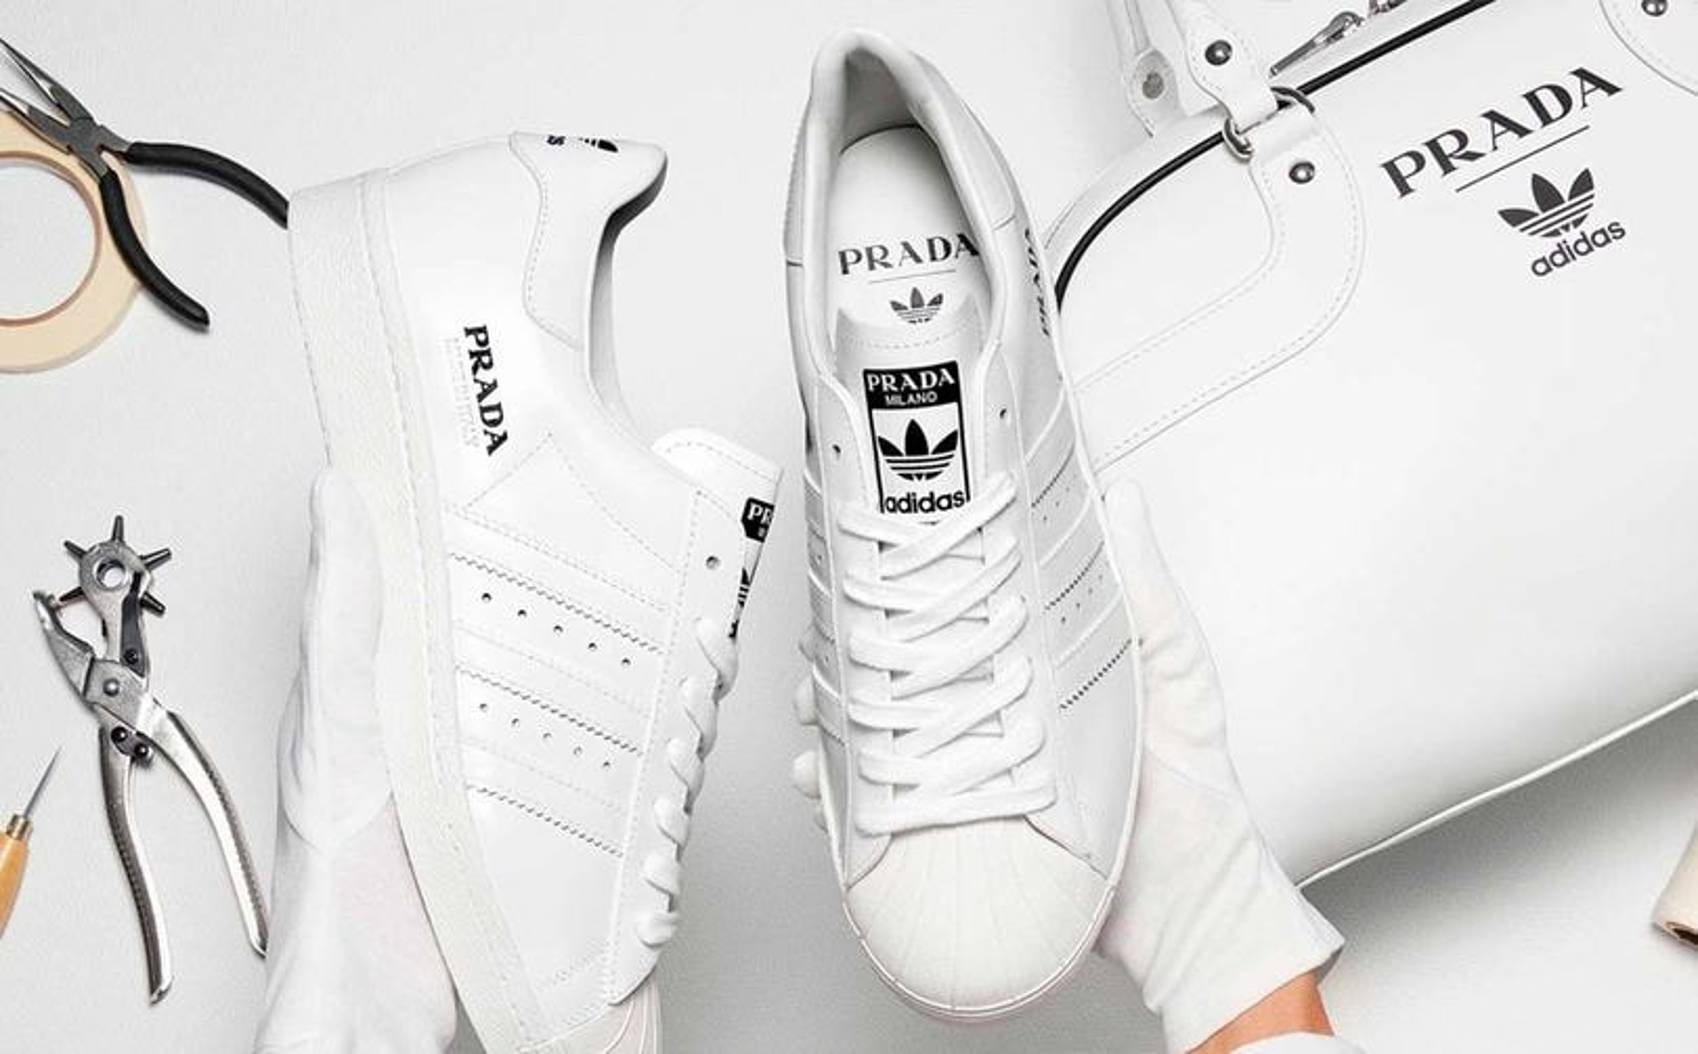 First pictures of Adidas Prada collaboration